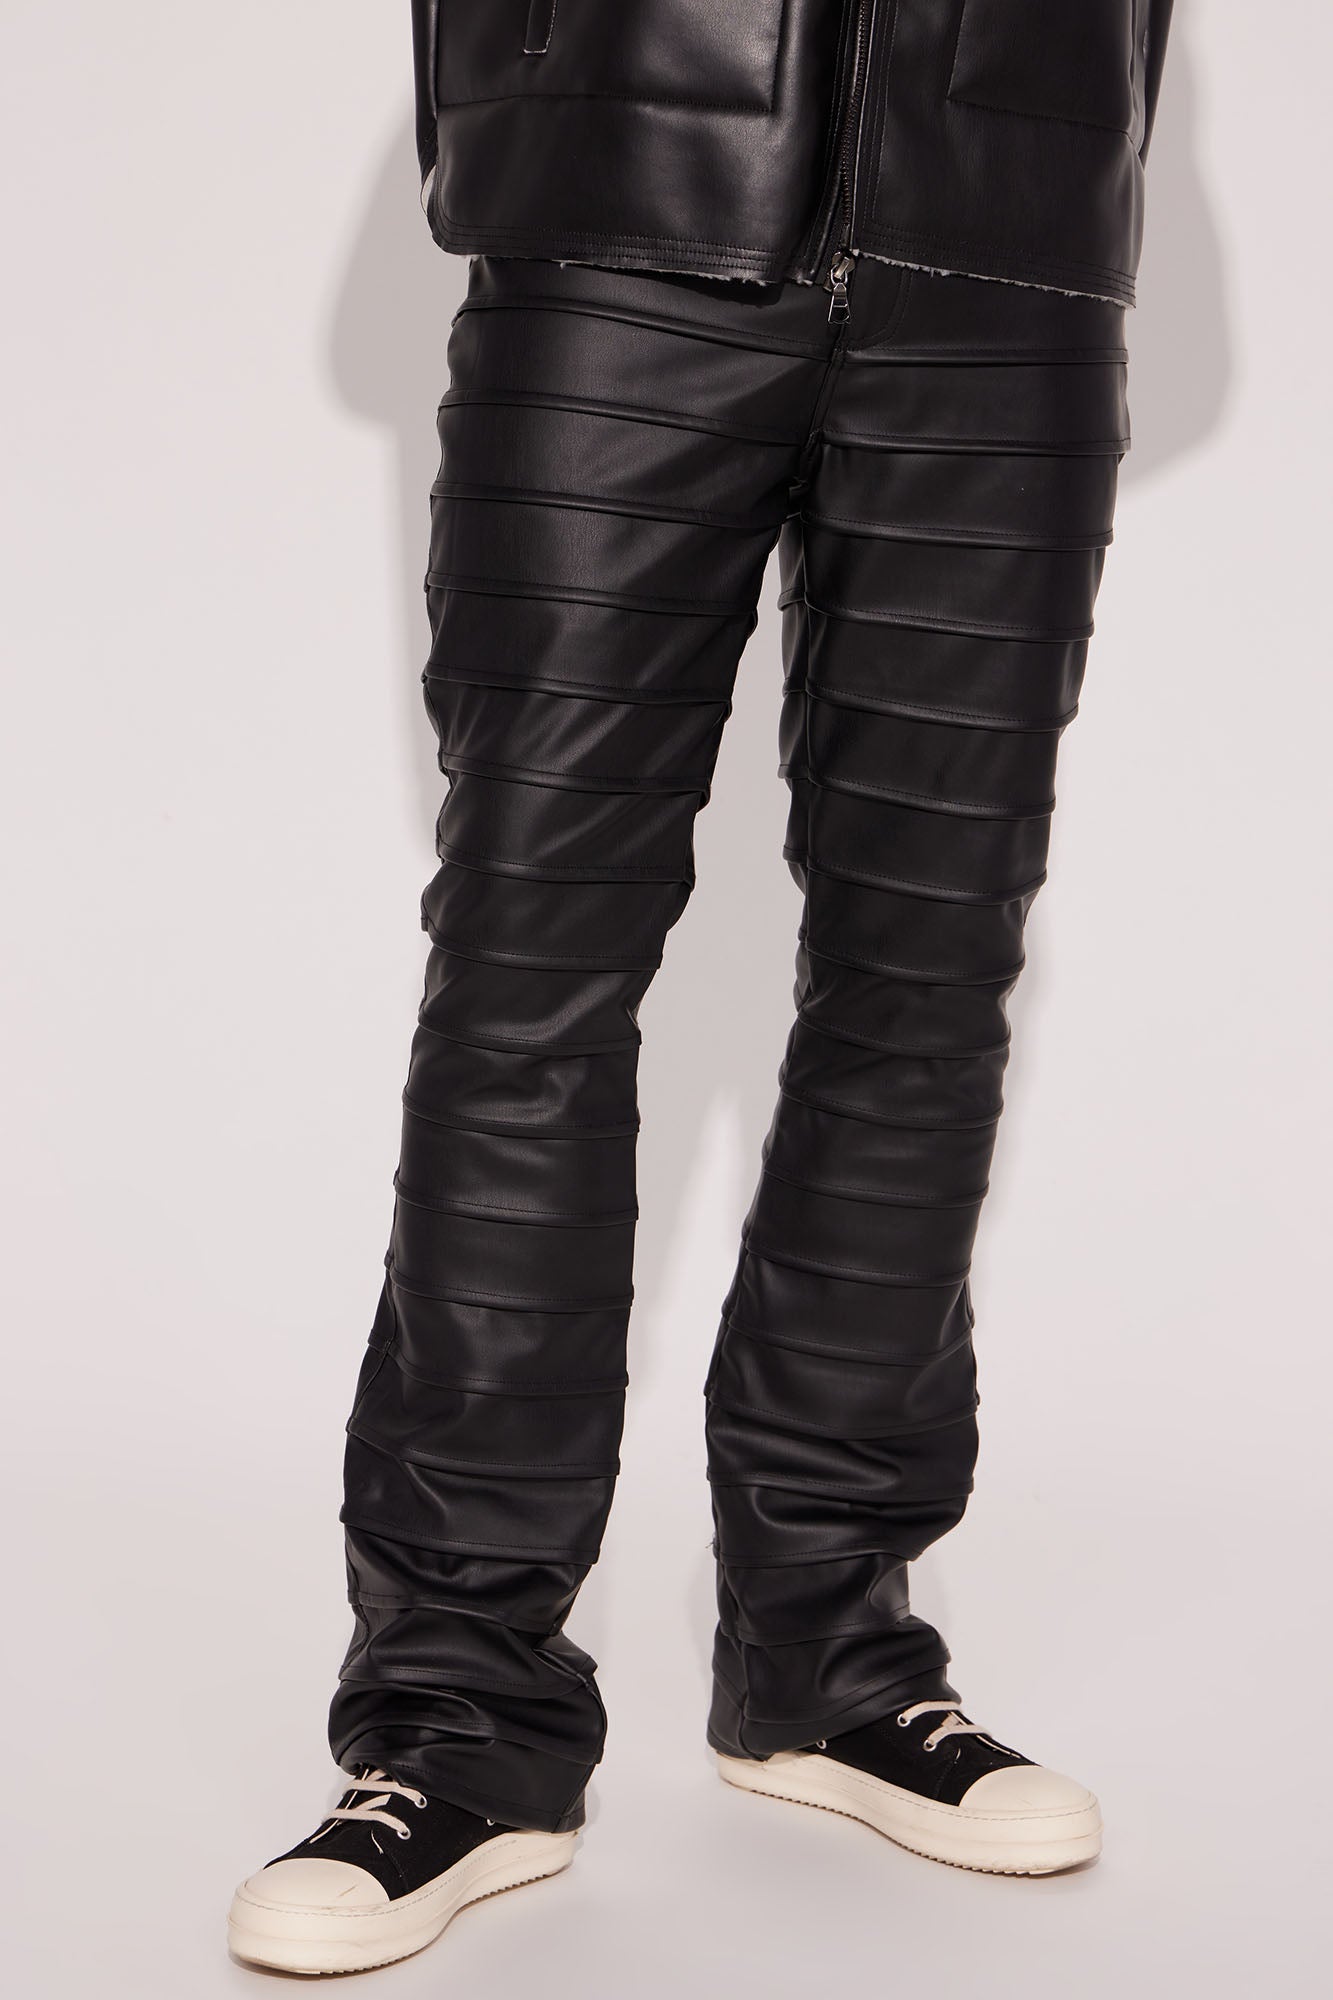 Extra Levels Faux Leather Slim Stacked Flared Pants - Black - HCWP 